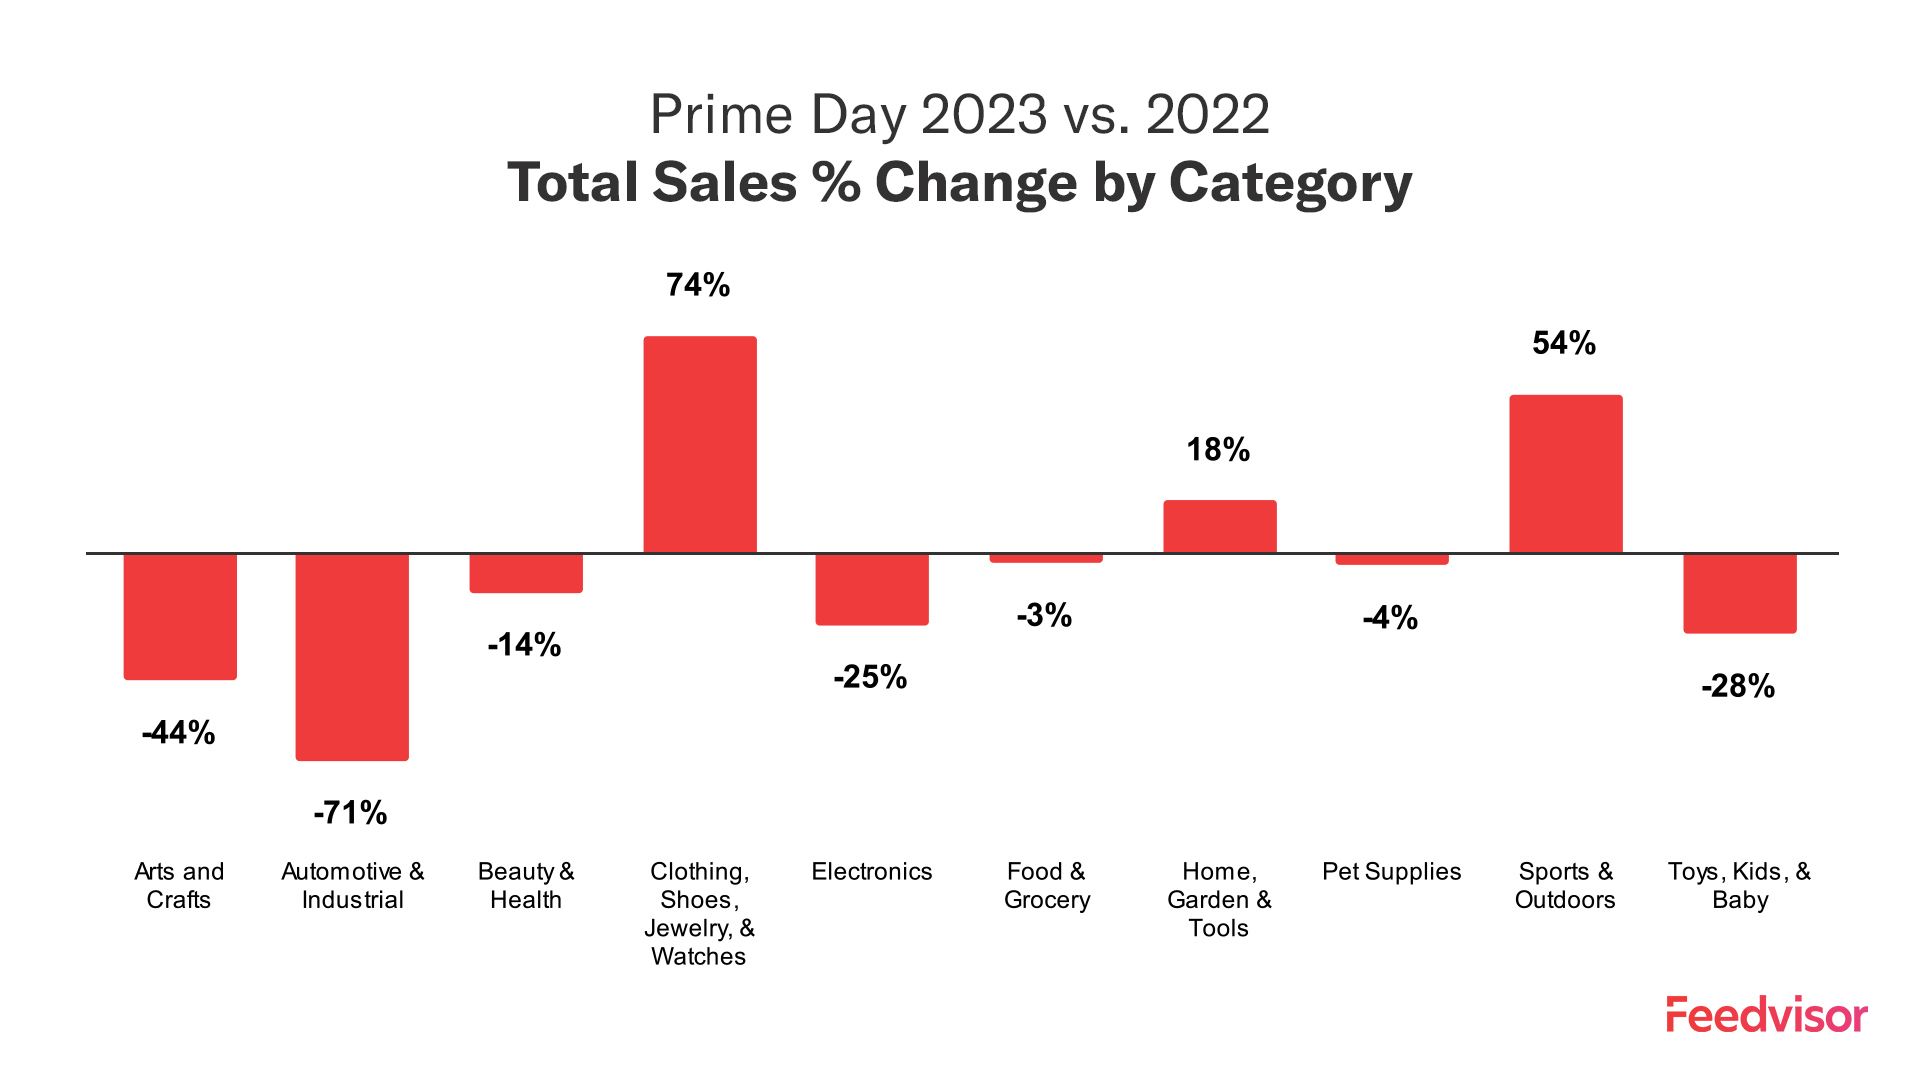 Discount-driven Consumers Spur Prime Day 2023 - Practical Ecommerce